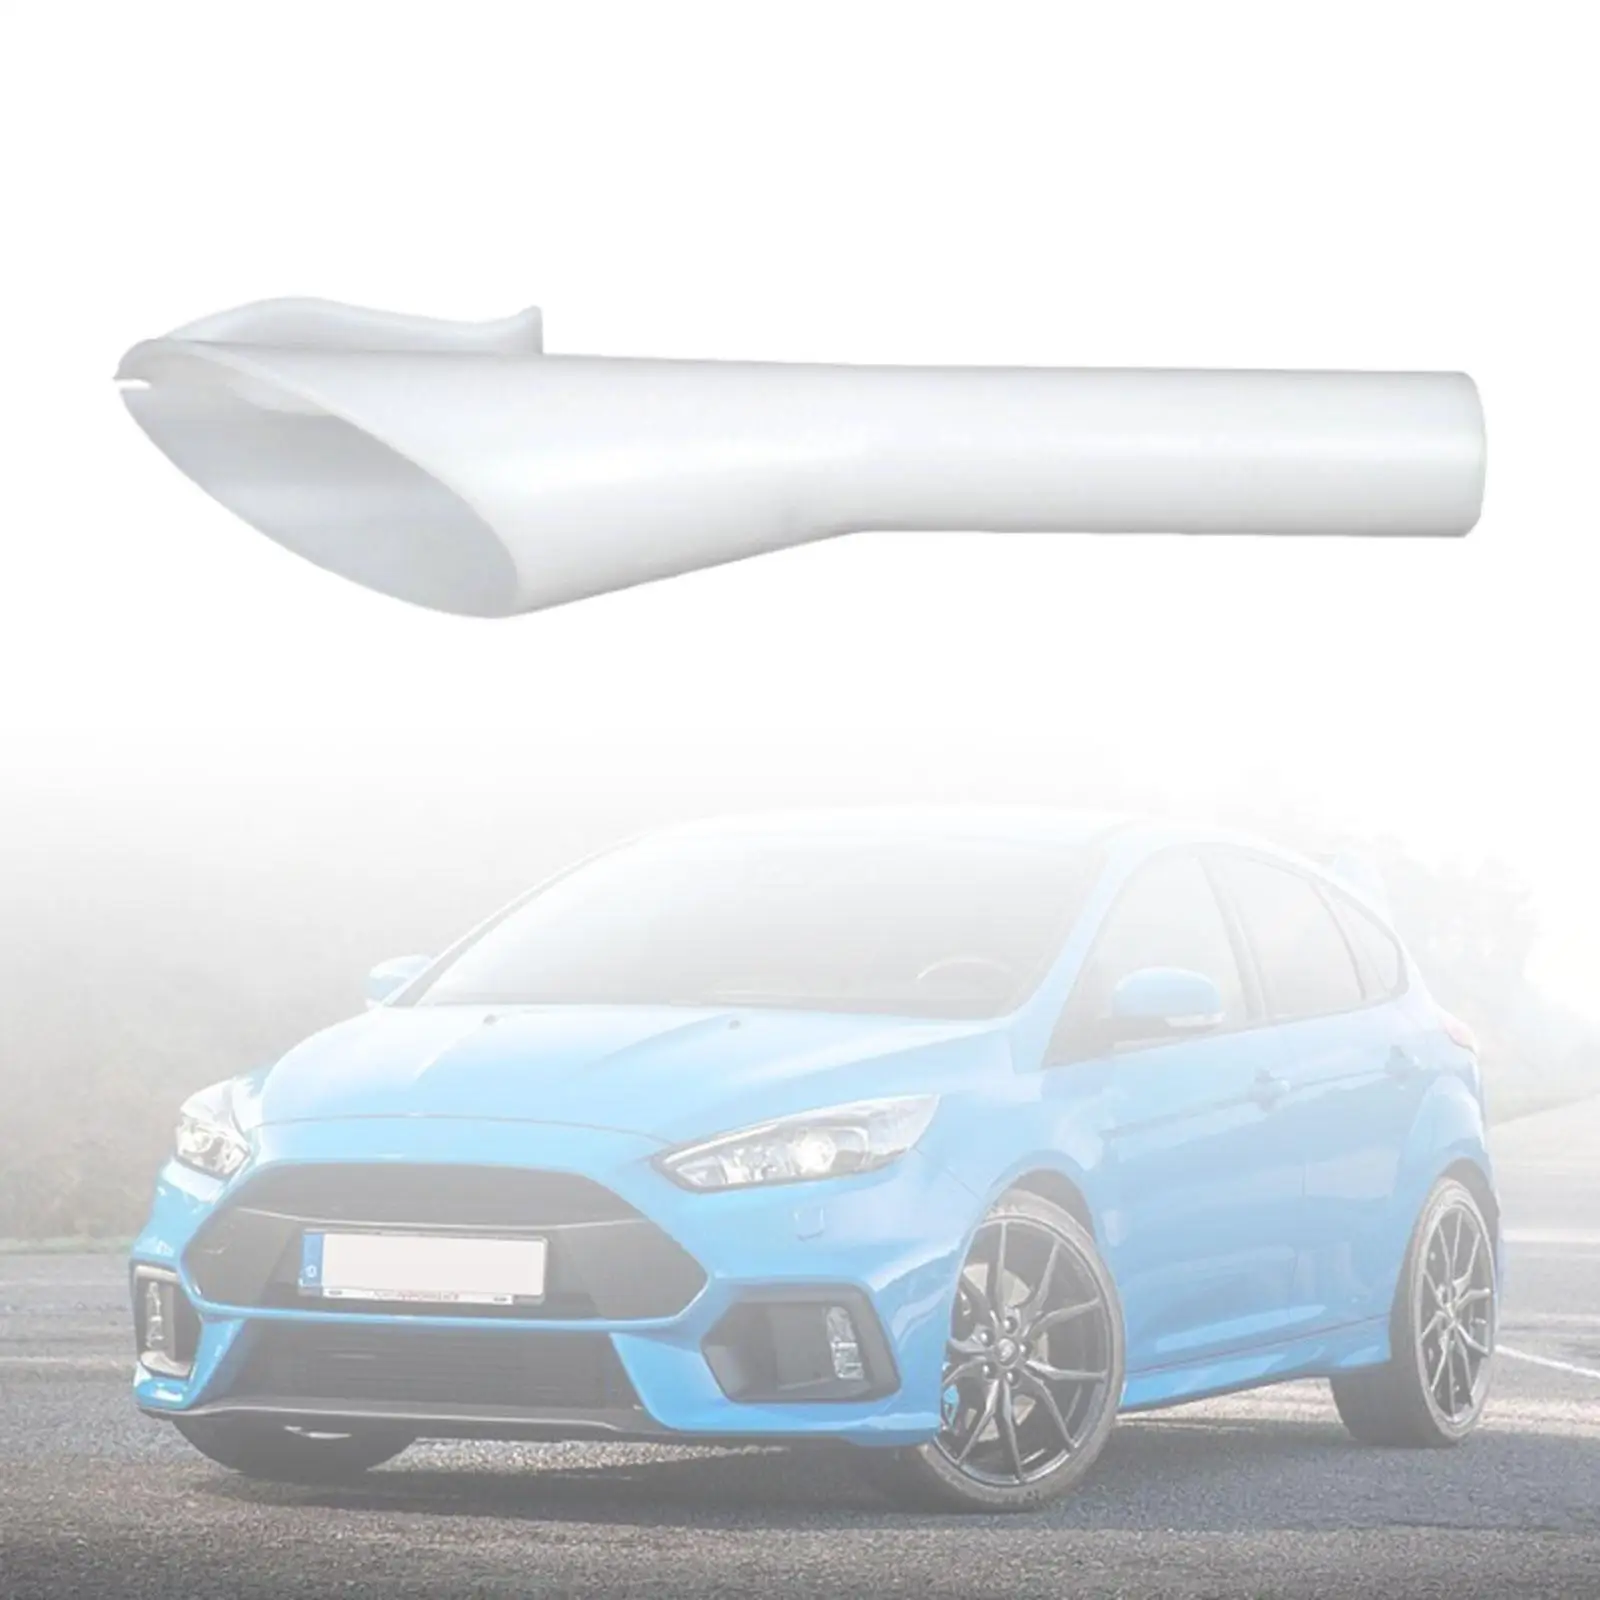 Fuel Fill Funnel Wear Resistance Easy to Mount Fuel Tank Filler Neck Sleeve for Ford S Max Galaxy Fiesta Focus C Max B Max